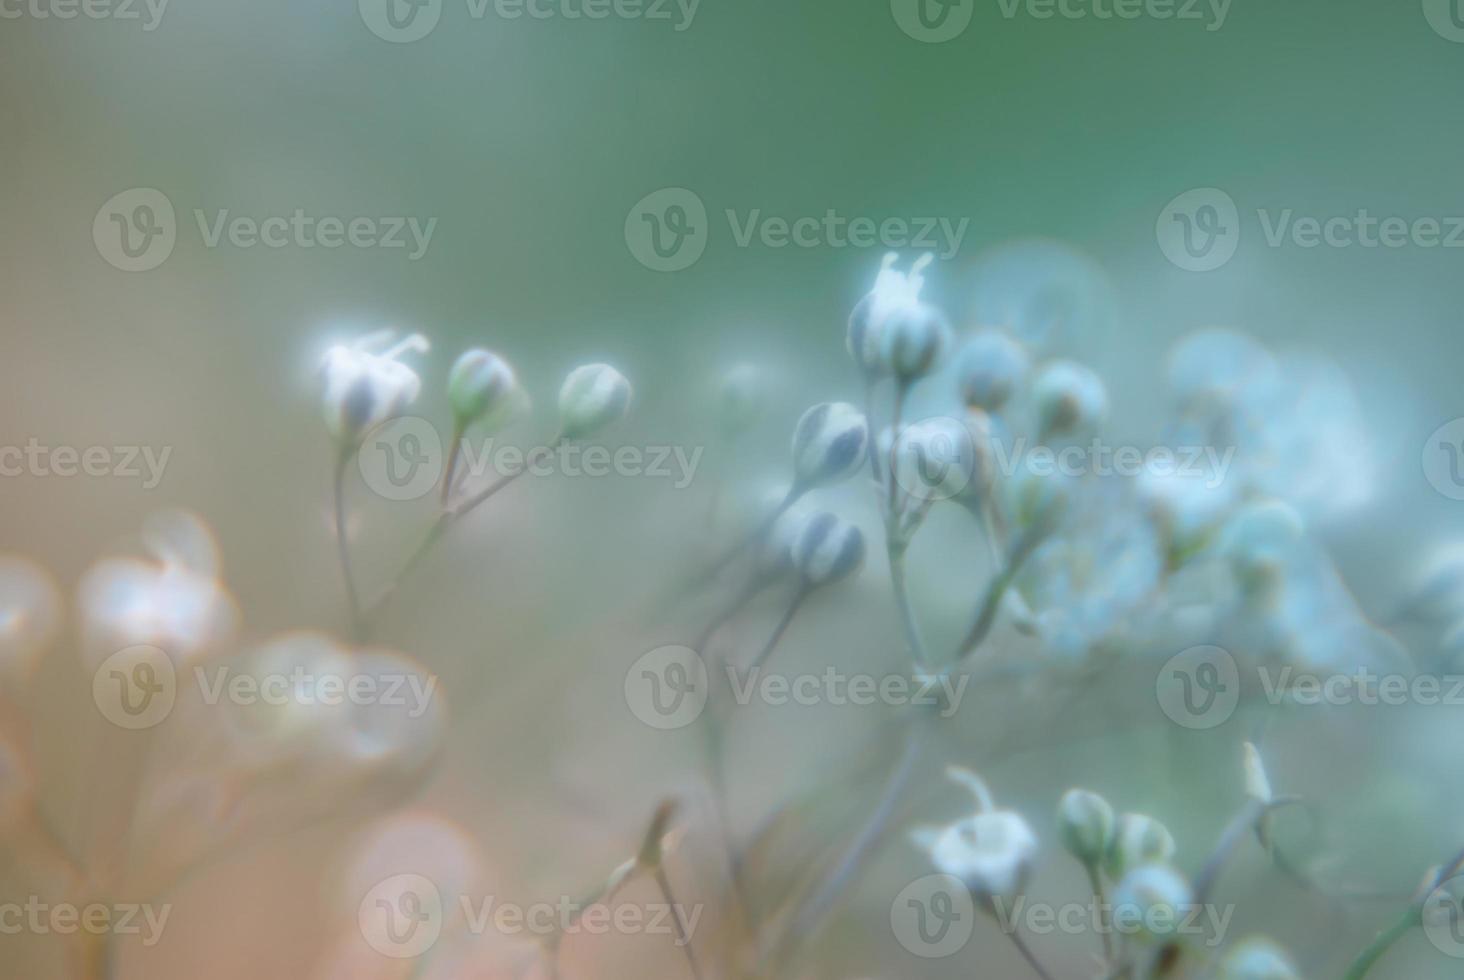 abstract blur colorful flowers background pattern photo